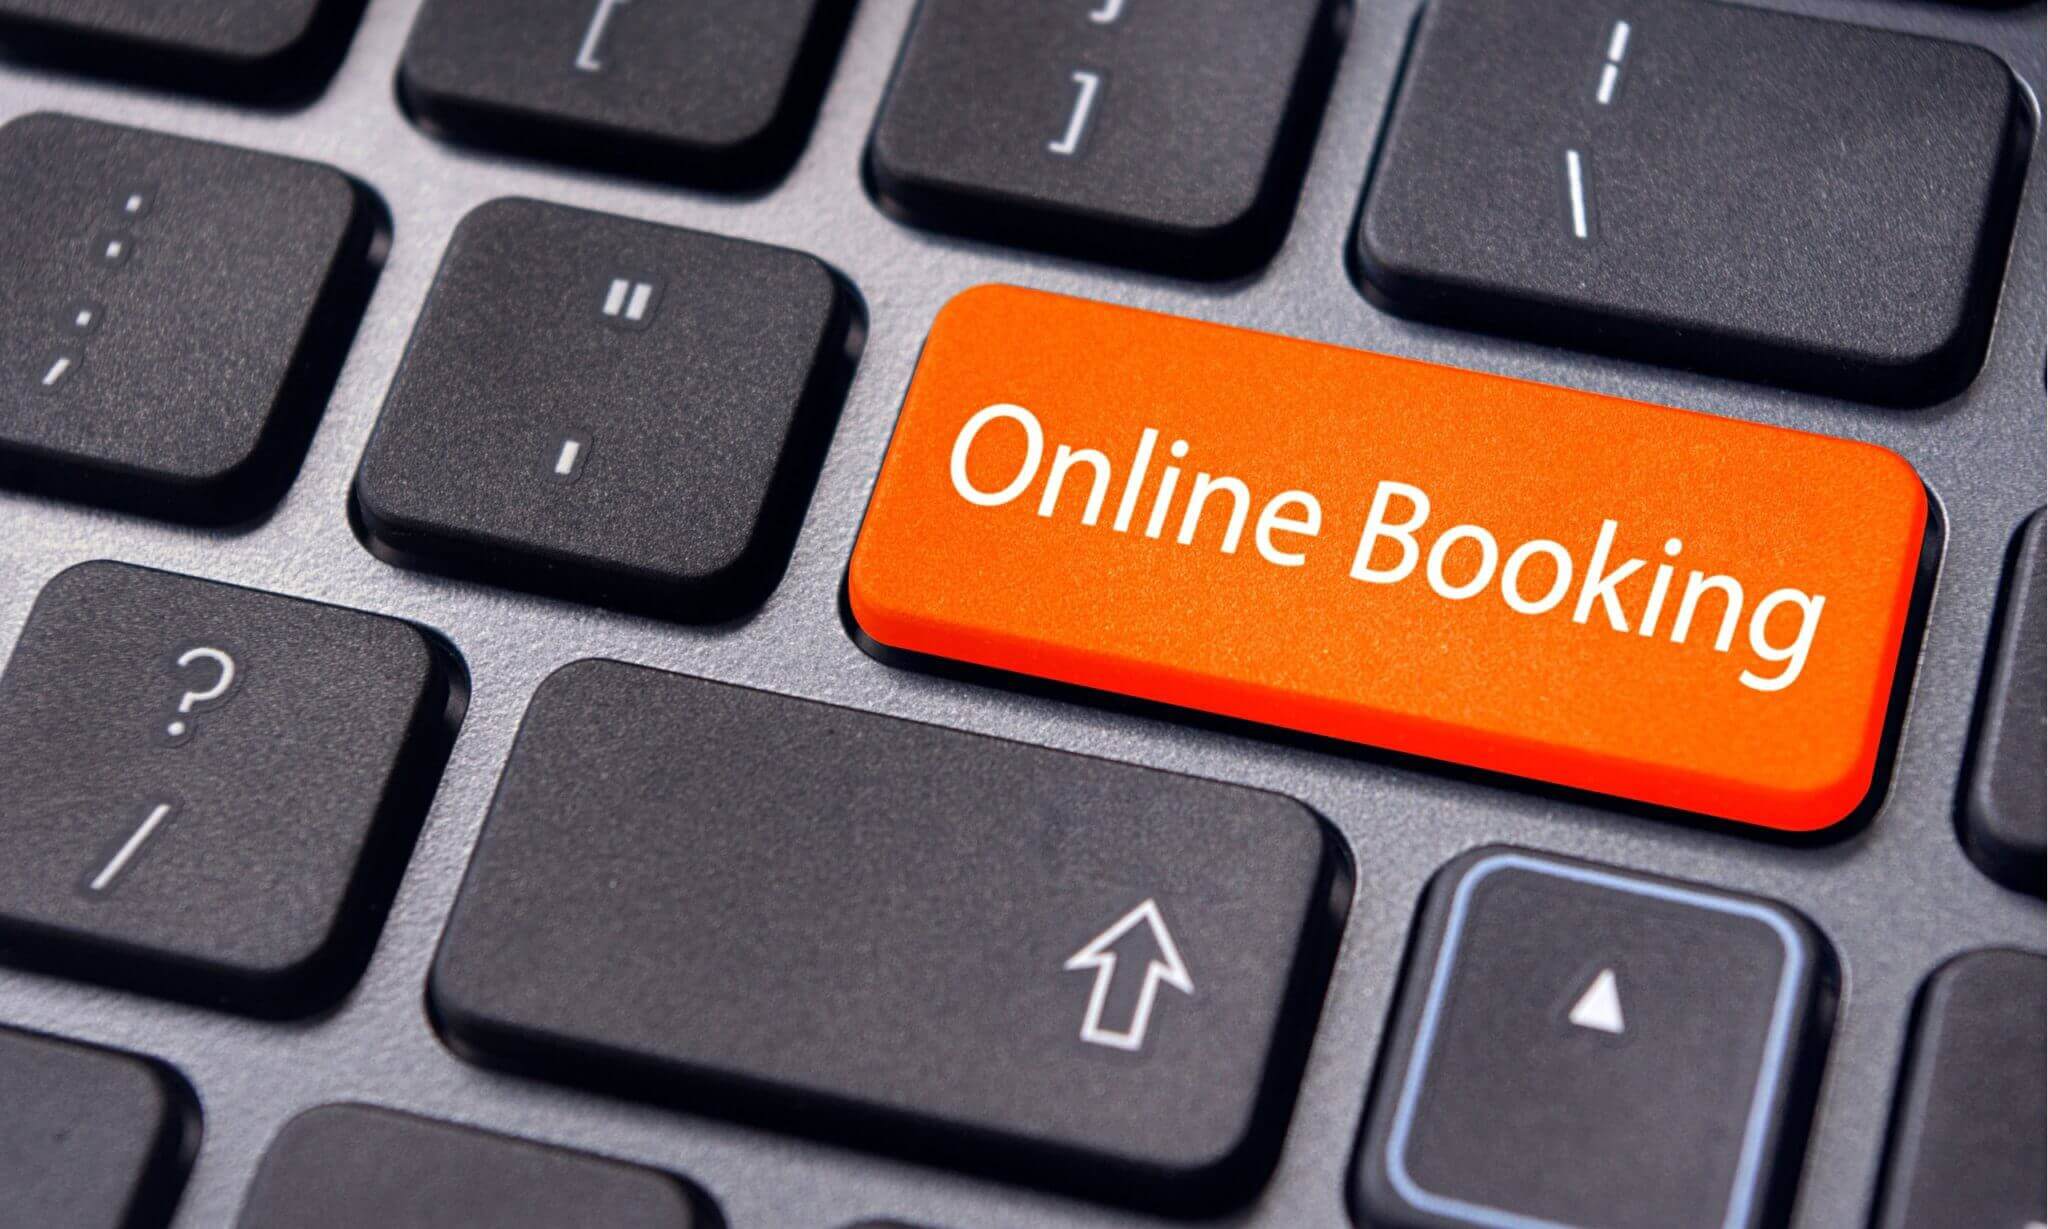 online booking key on keyboard reflecting importance of direct bookings for hotels